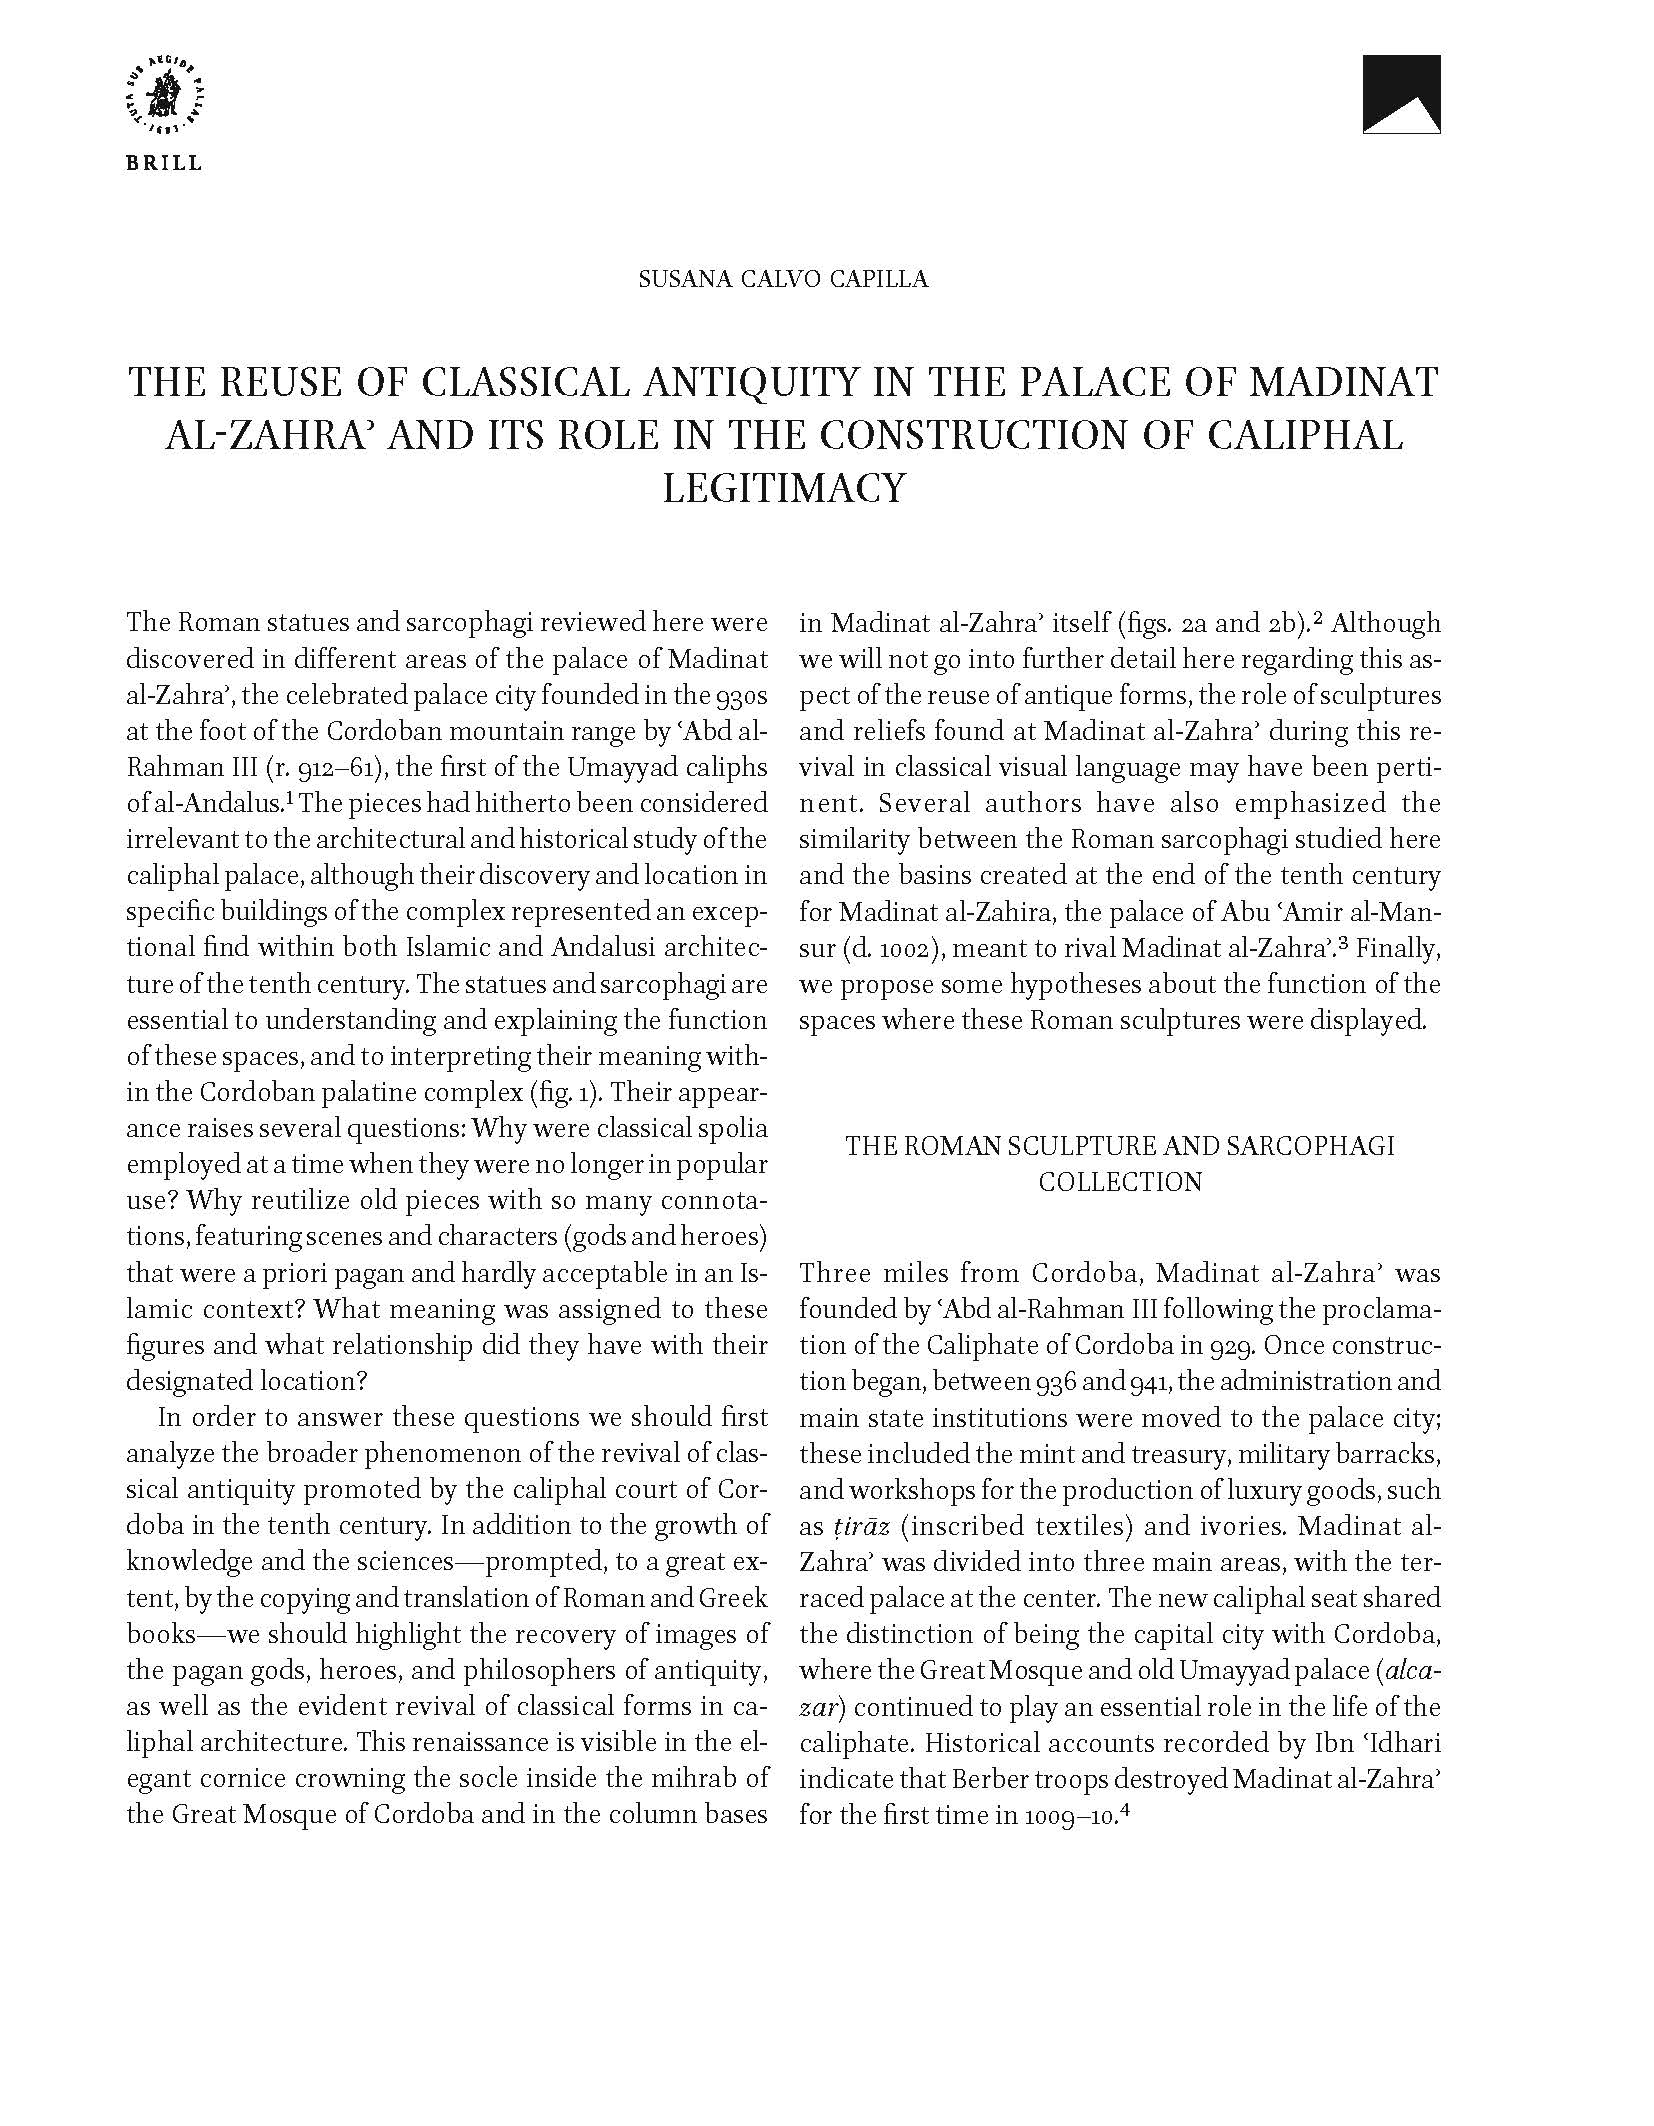 The Reuse of Classical Antiquity in the Palace of Madinat al-Zahra' and its Role in the Construction of Caliphal Legitimacy